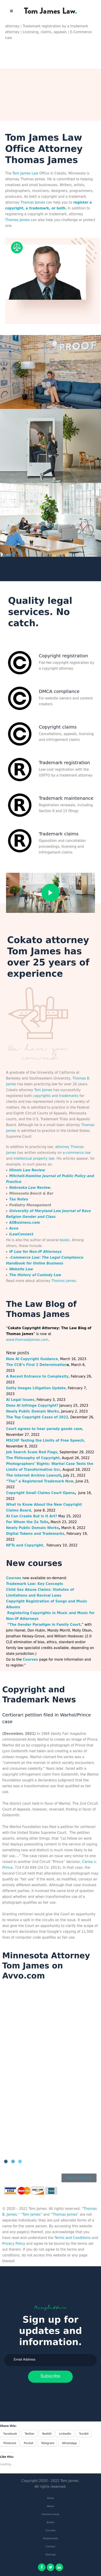 Law Office of Tom James - Cokato MN Lawyers